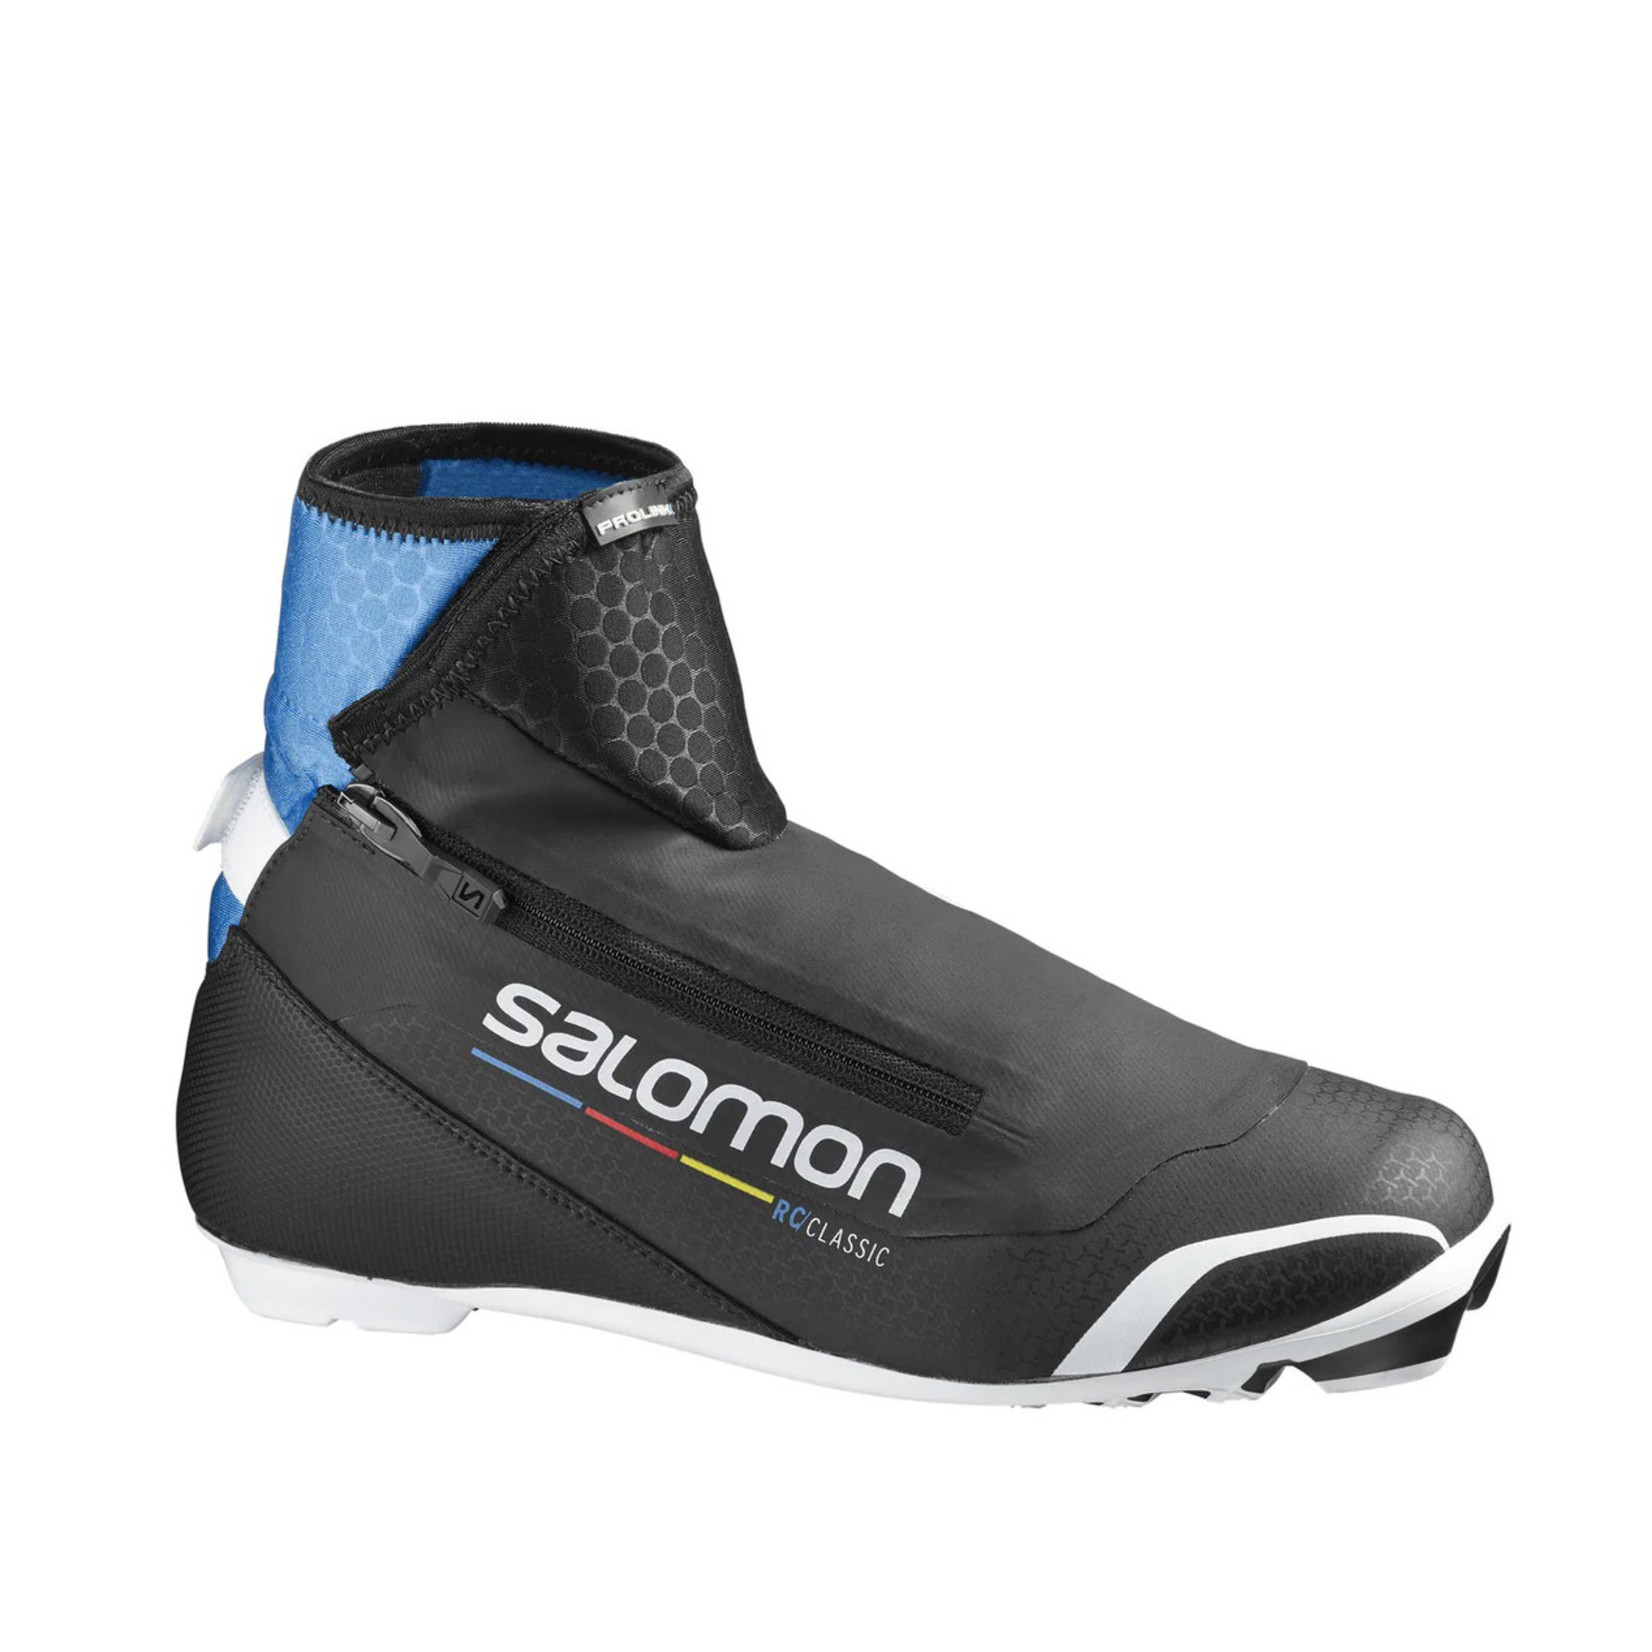 Salomon Prolink RC Classic Boot 19/20 - Rebec and Kroes Cycle & Sport